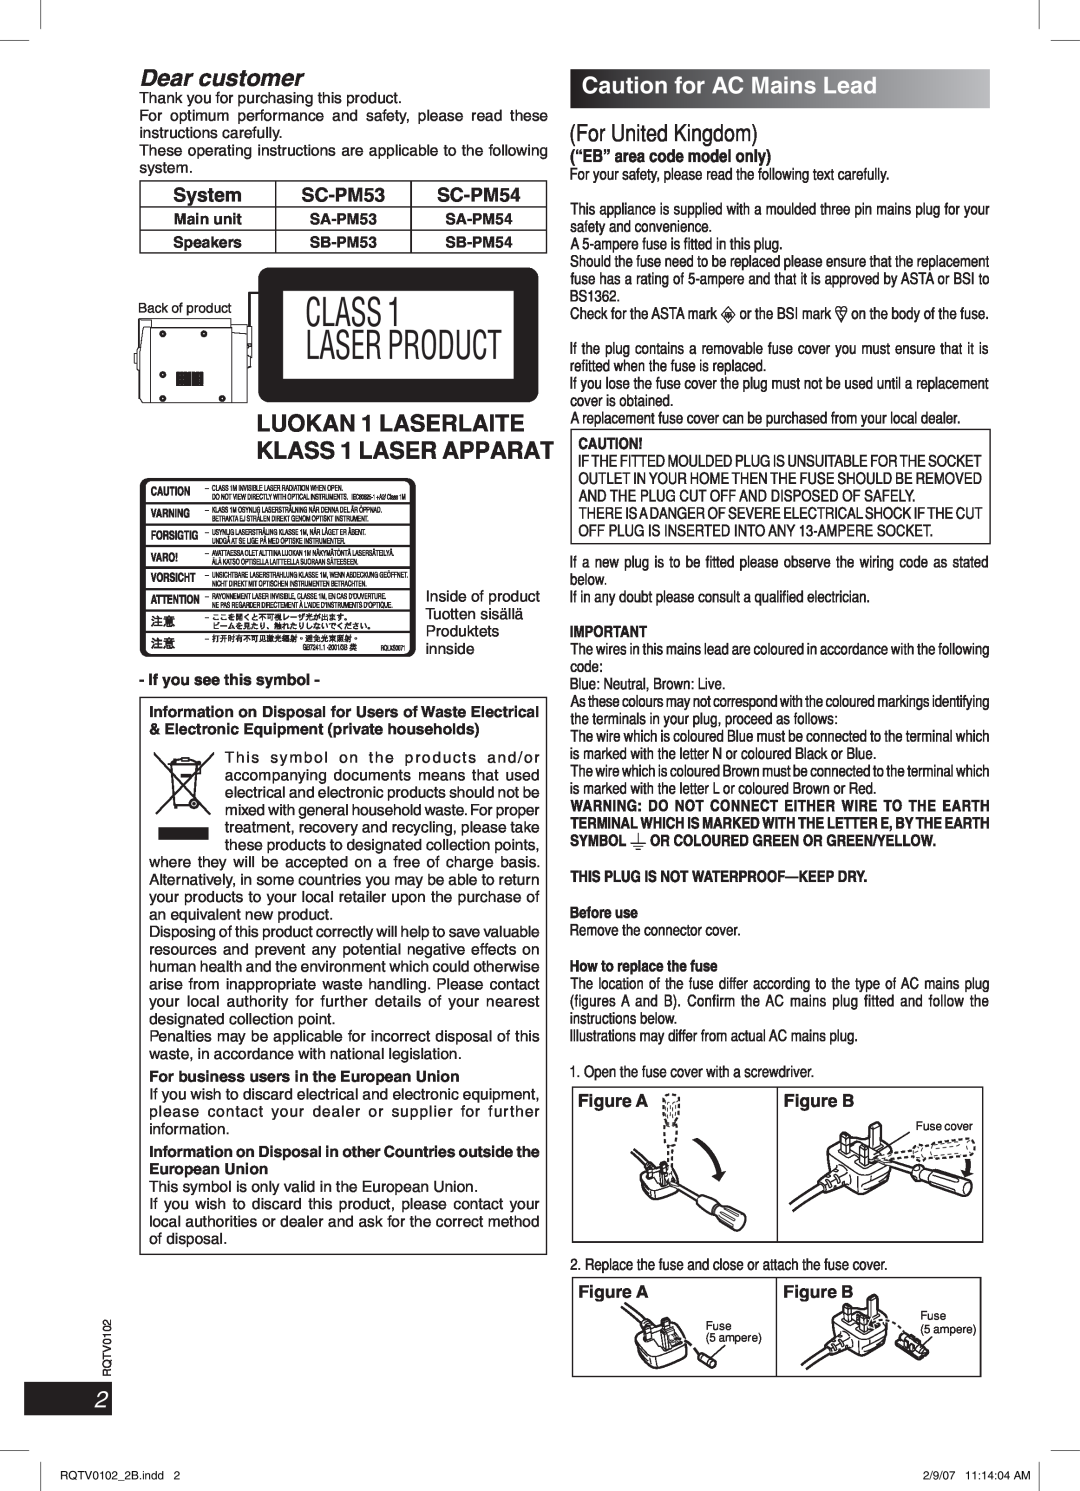 Panasonic SC-PM54 specifications Caution for AC Mains Lead, System, SC-PM53, Figure A, Figure B 